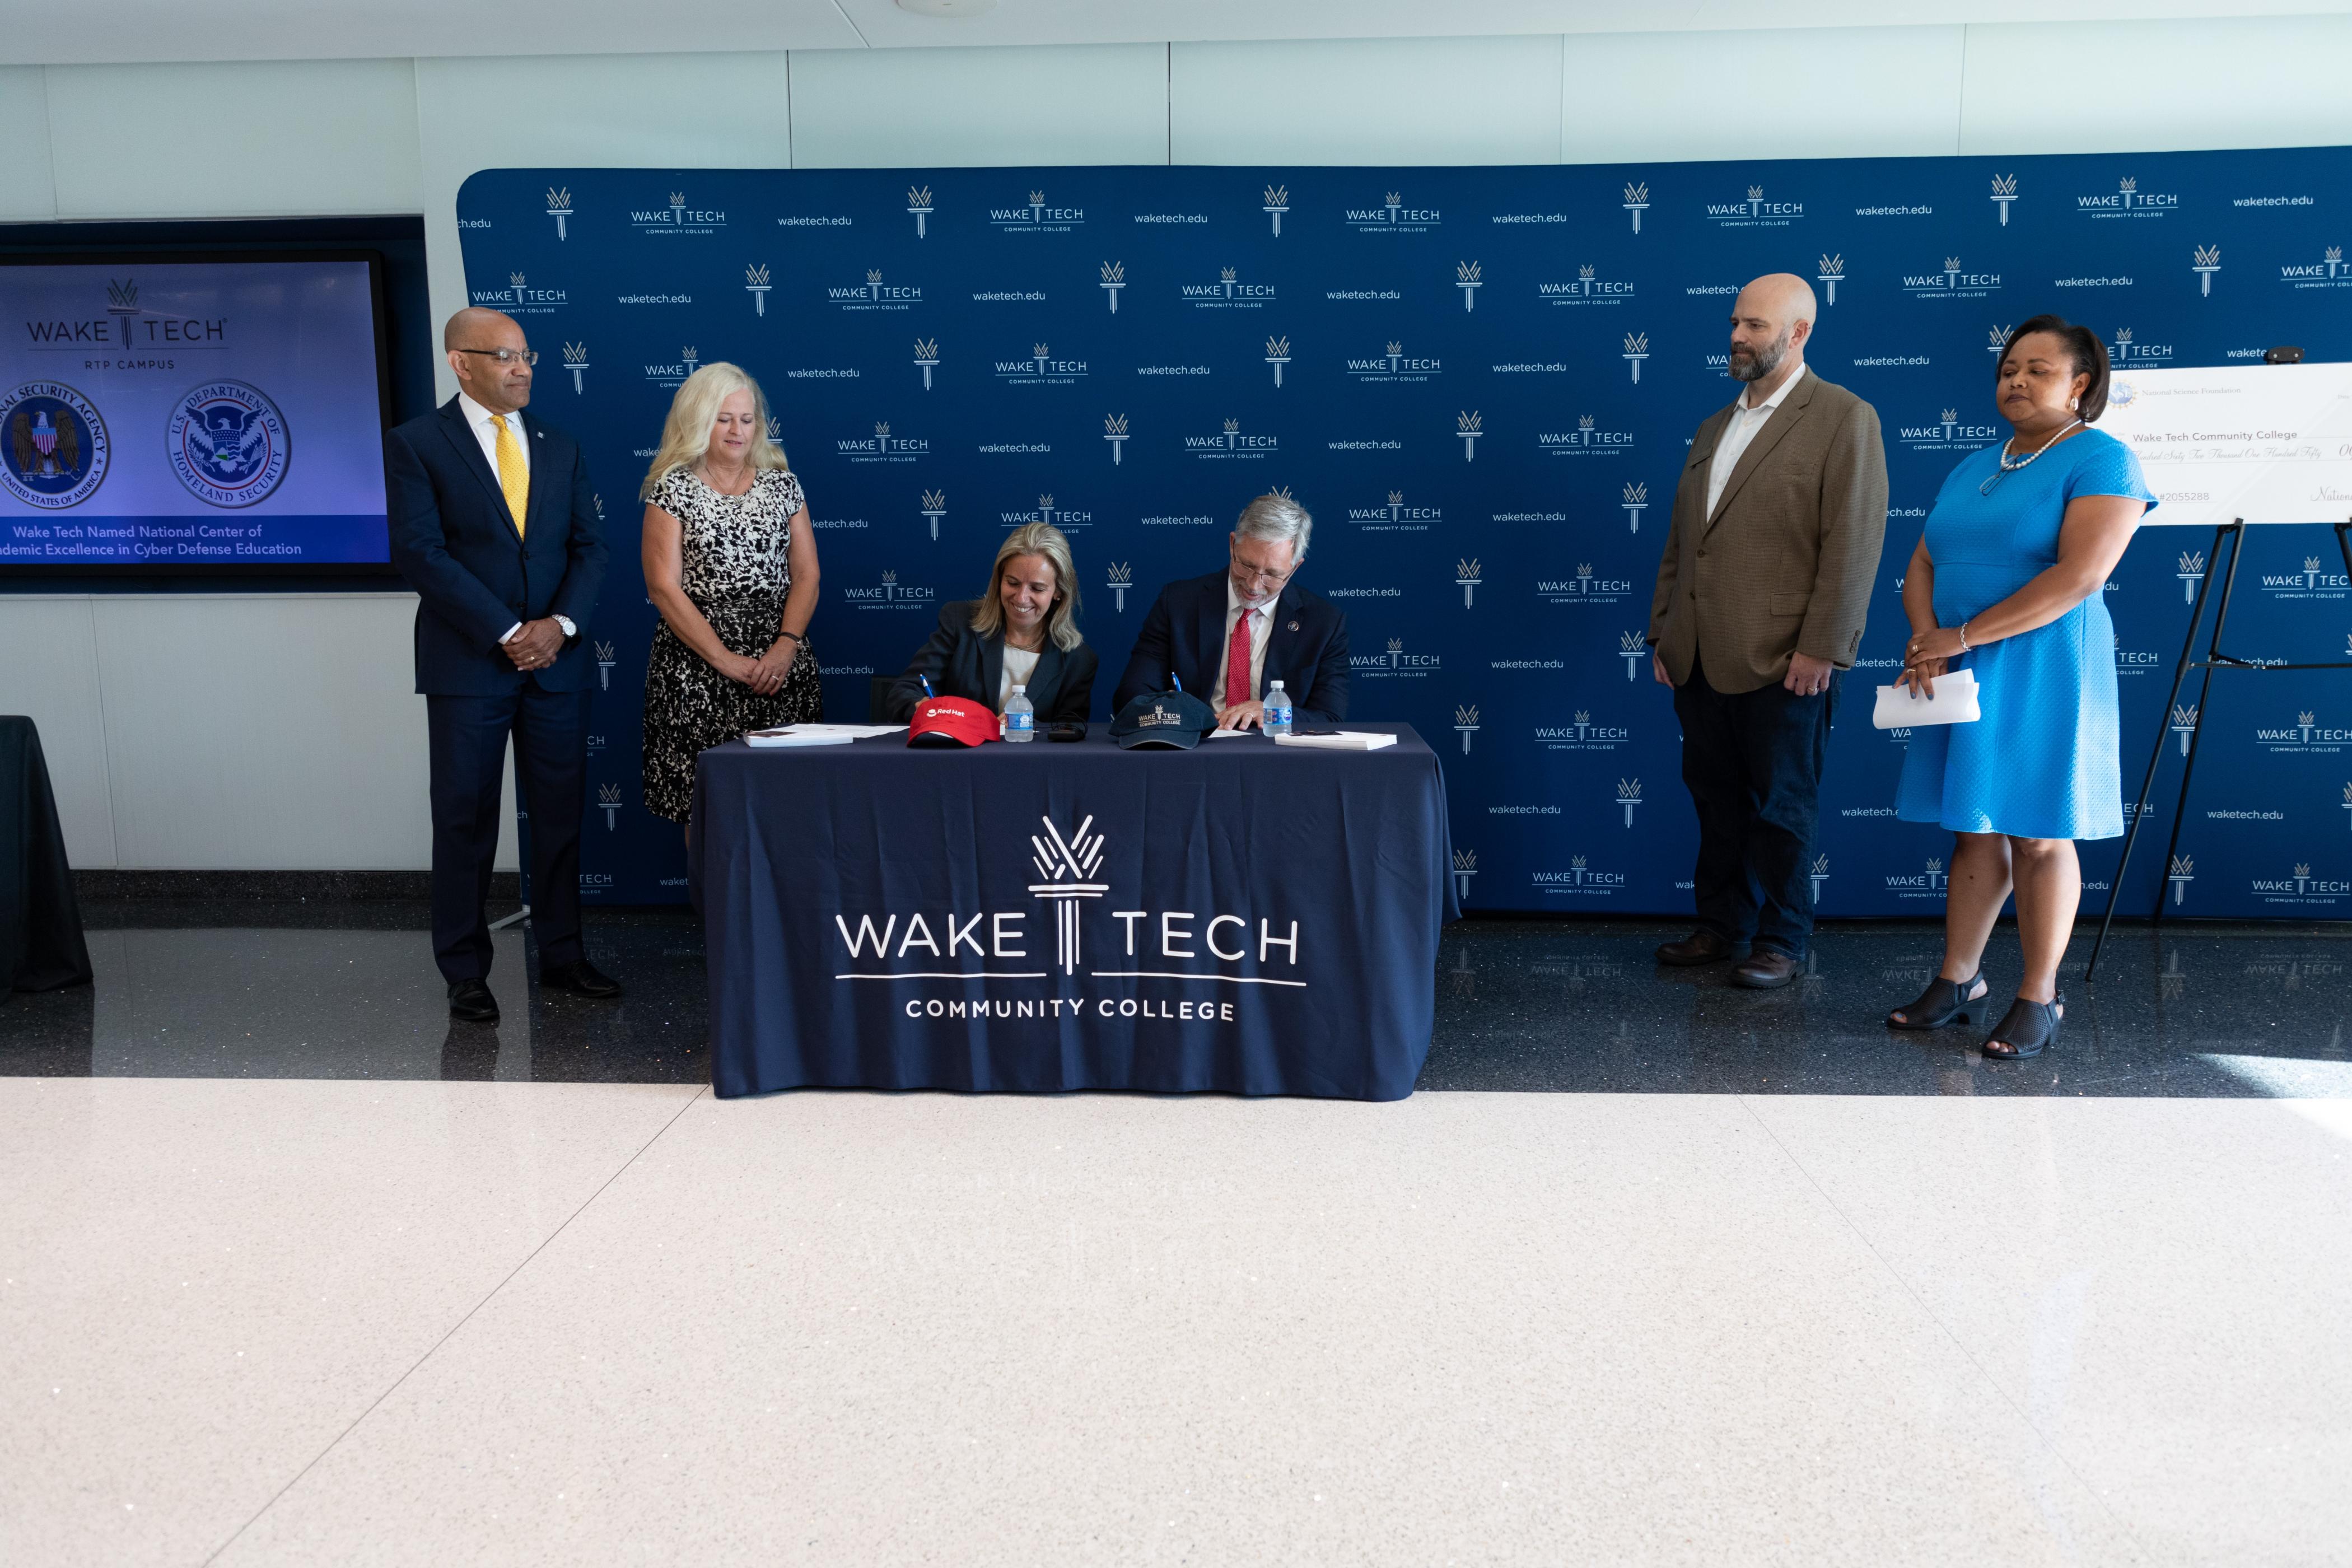 Wake Tech Collaborates with Red Hat to Offer Red Hat Training and